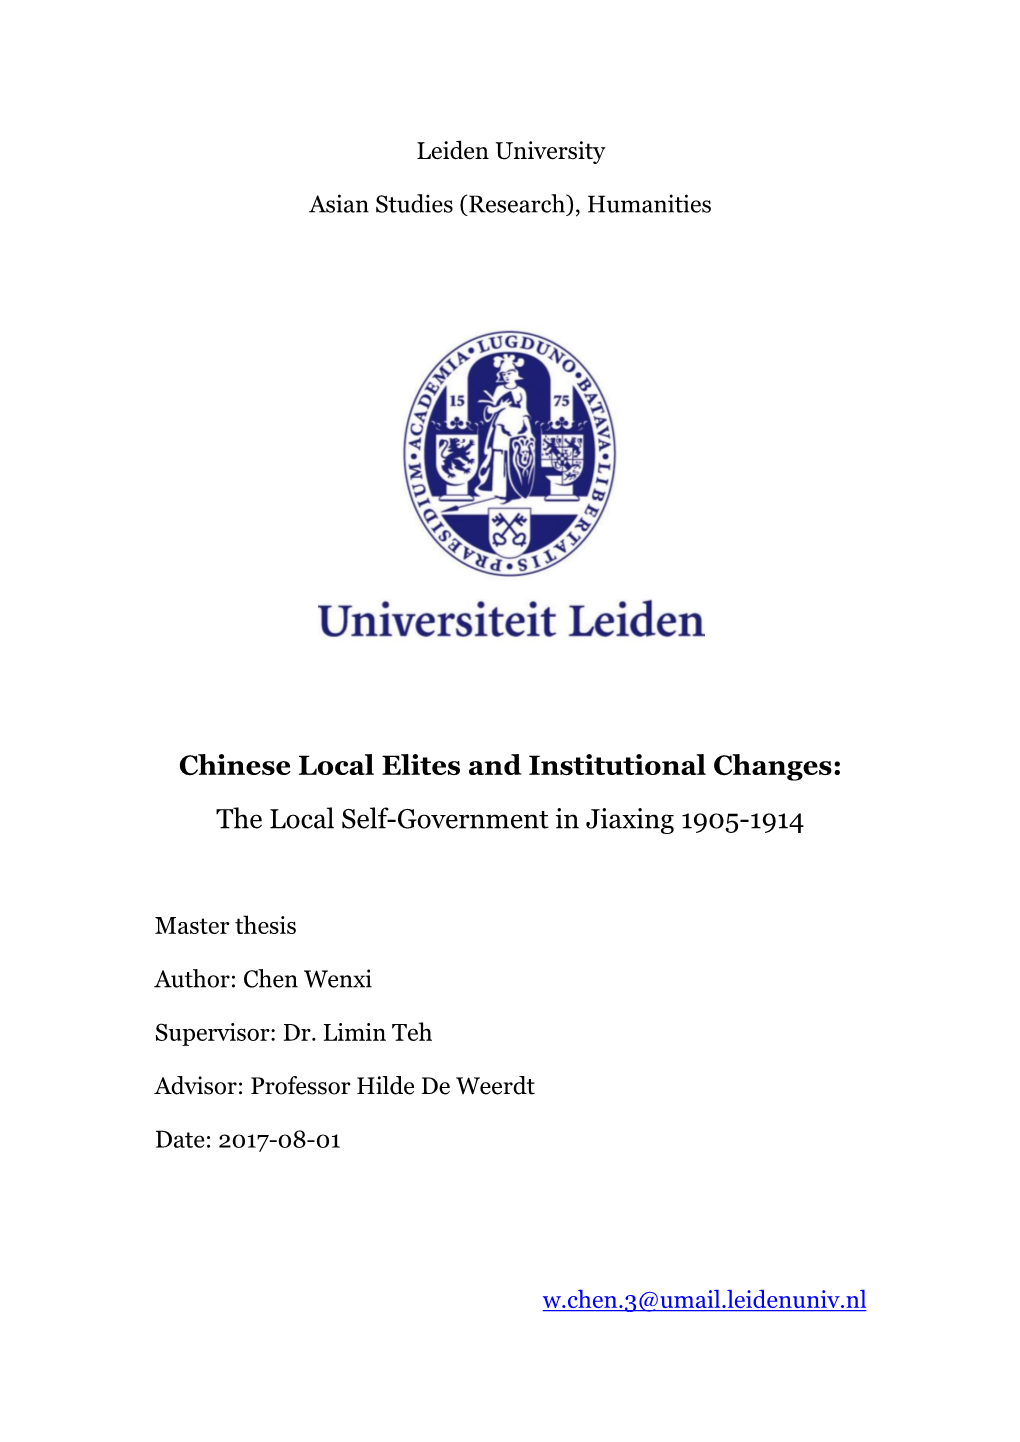 Chinese Local Elites and Institutional Changes: the Local Self-Government in Jiaxing 1905-1914